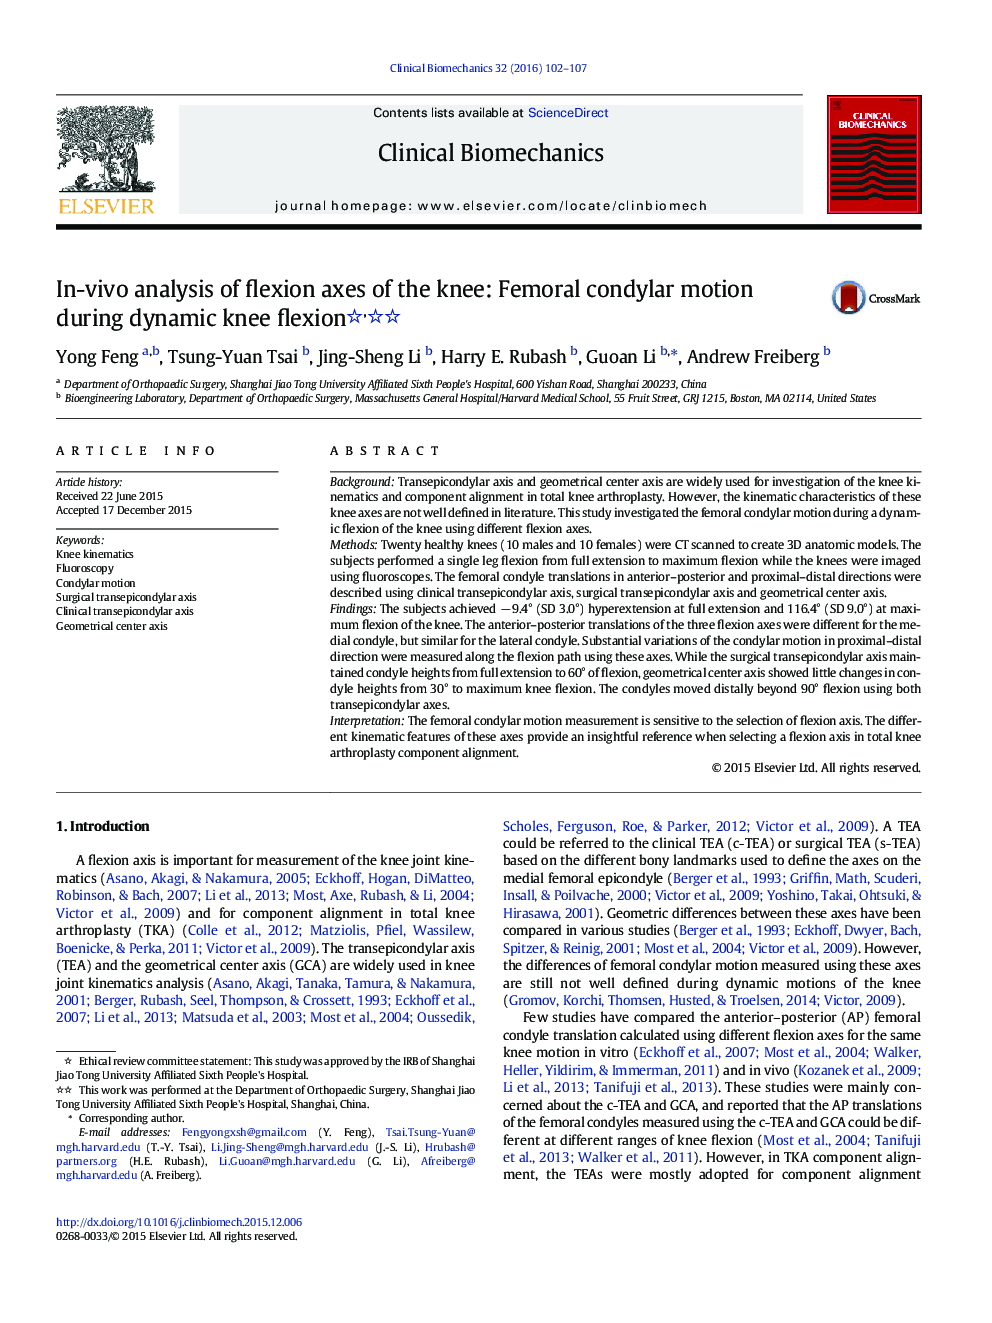 In-vivo analysis of flexion axes of the knee: Femoral condylar motion during dynamic knee flexion